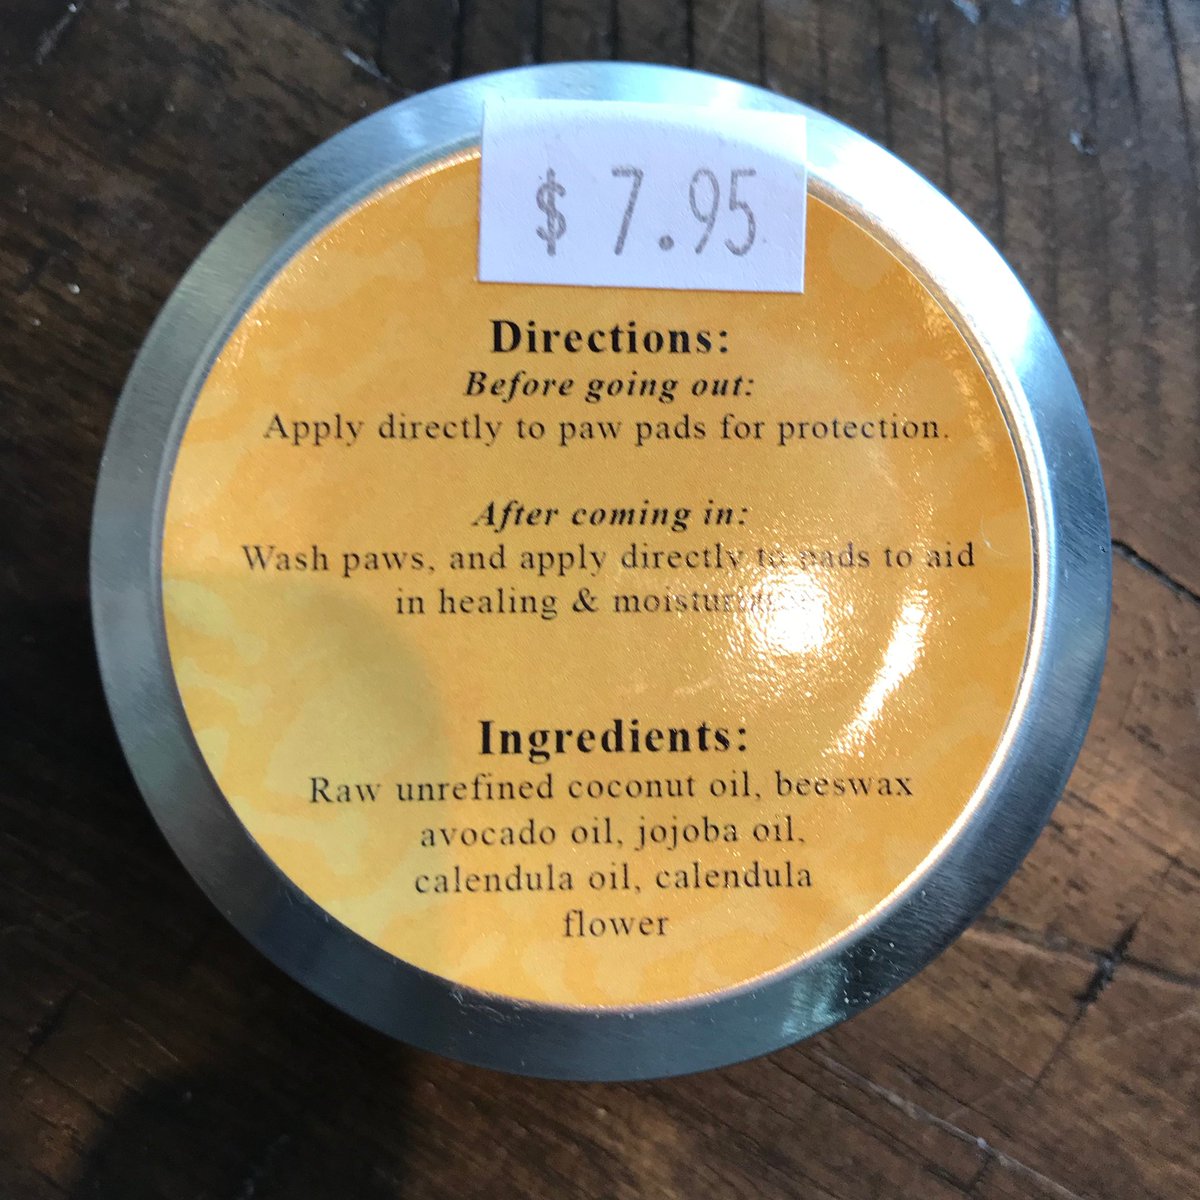 Introducing LDFC Paw Balm!
All-natural, simple ingredients, and made in-house.

Ideal for protecting paws from salt, and healing dry paws.

Normally $7.95, but $2 off for the month of January!

#pawbalm #pawprotection #drypaws #crackedpaws #coldweather #drivewaysalt #sidewalksalt